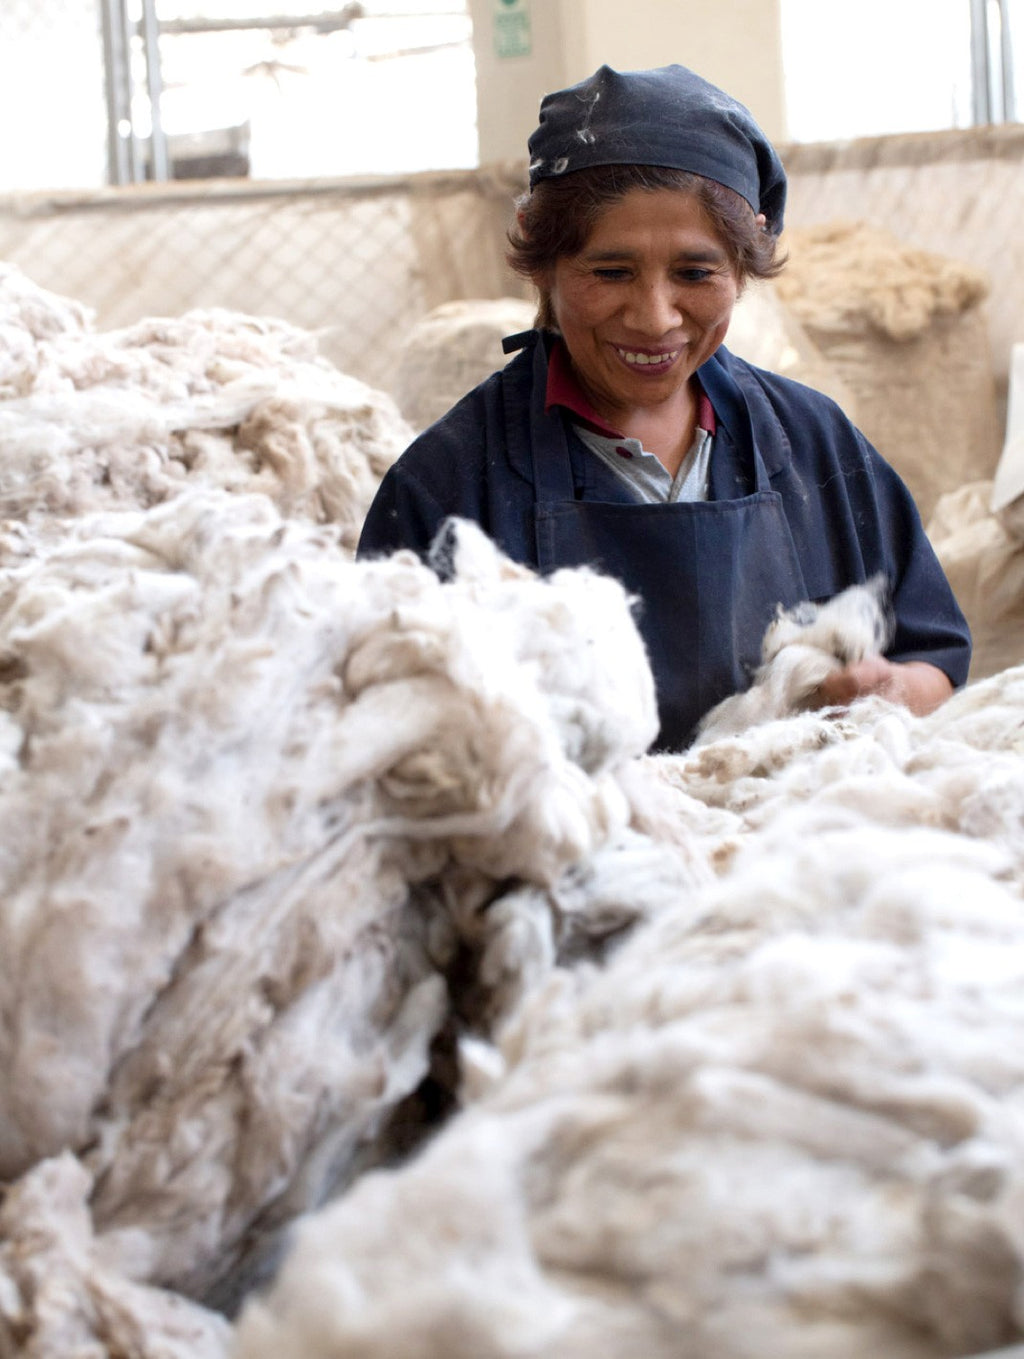 Woman smiling while working with large piles of wool.